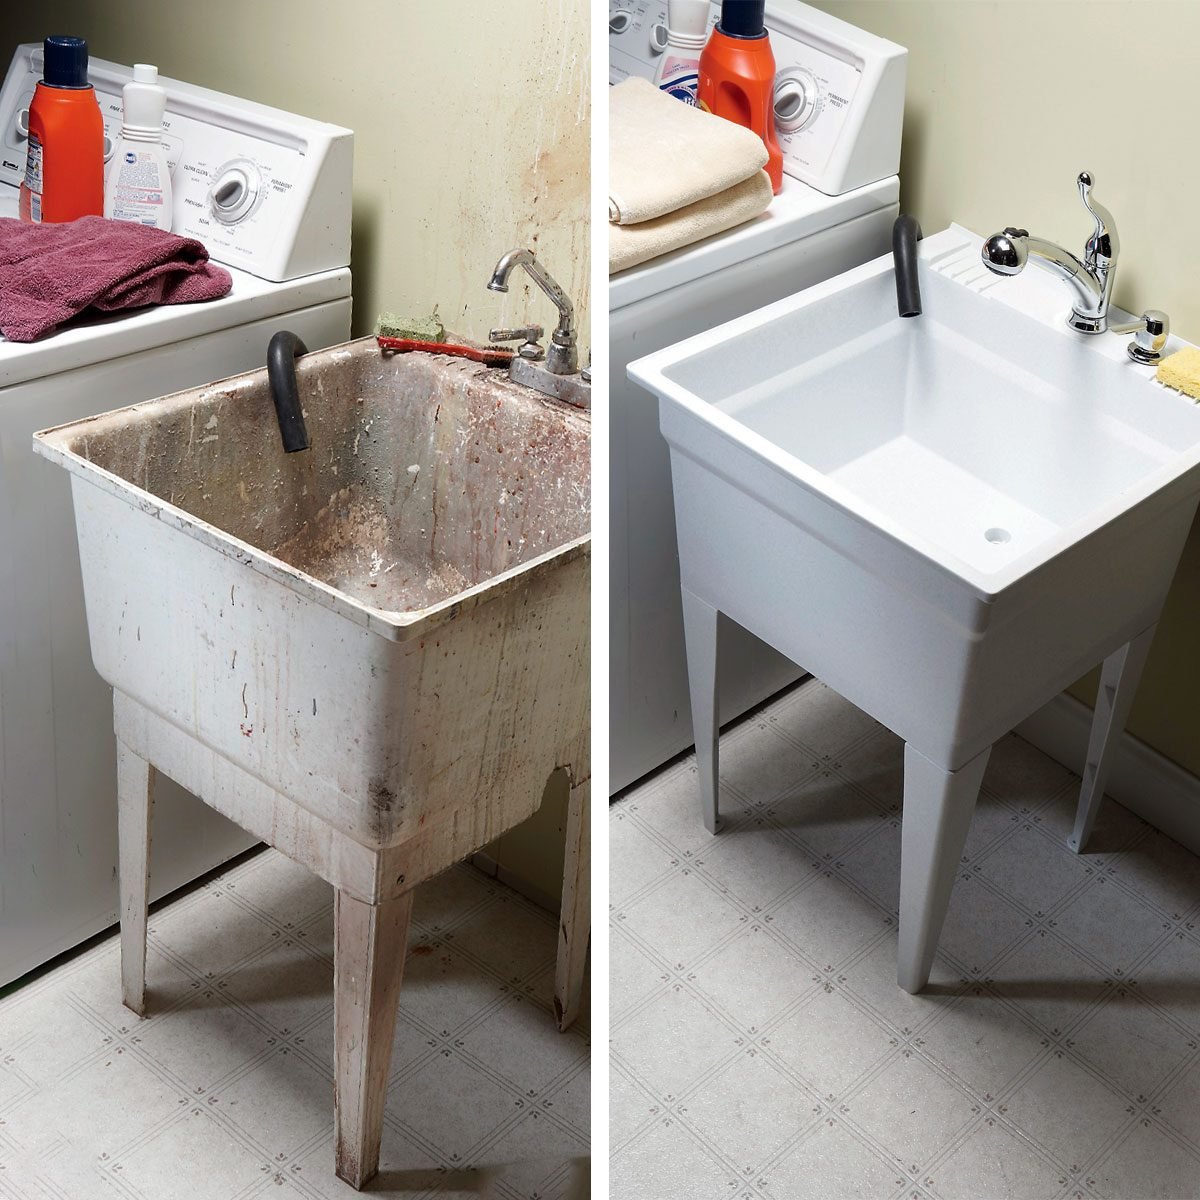 How To Replace A Utility Sink